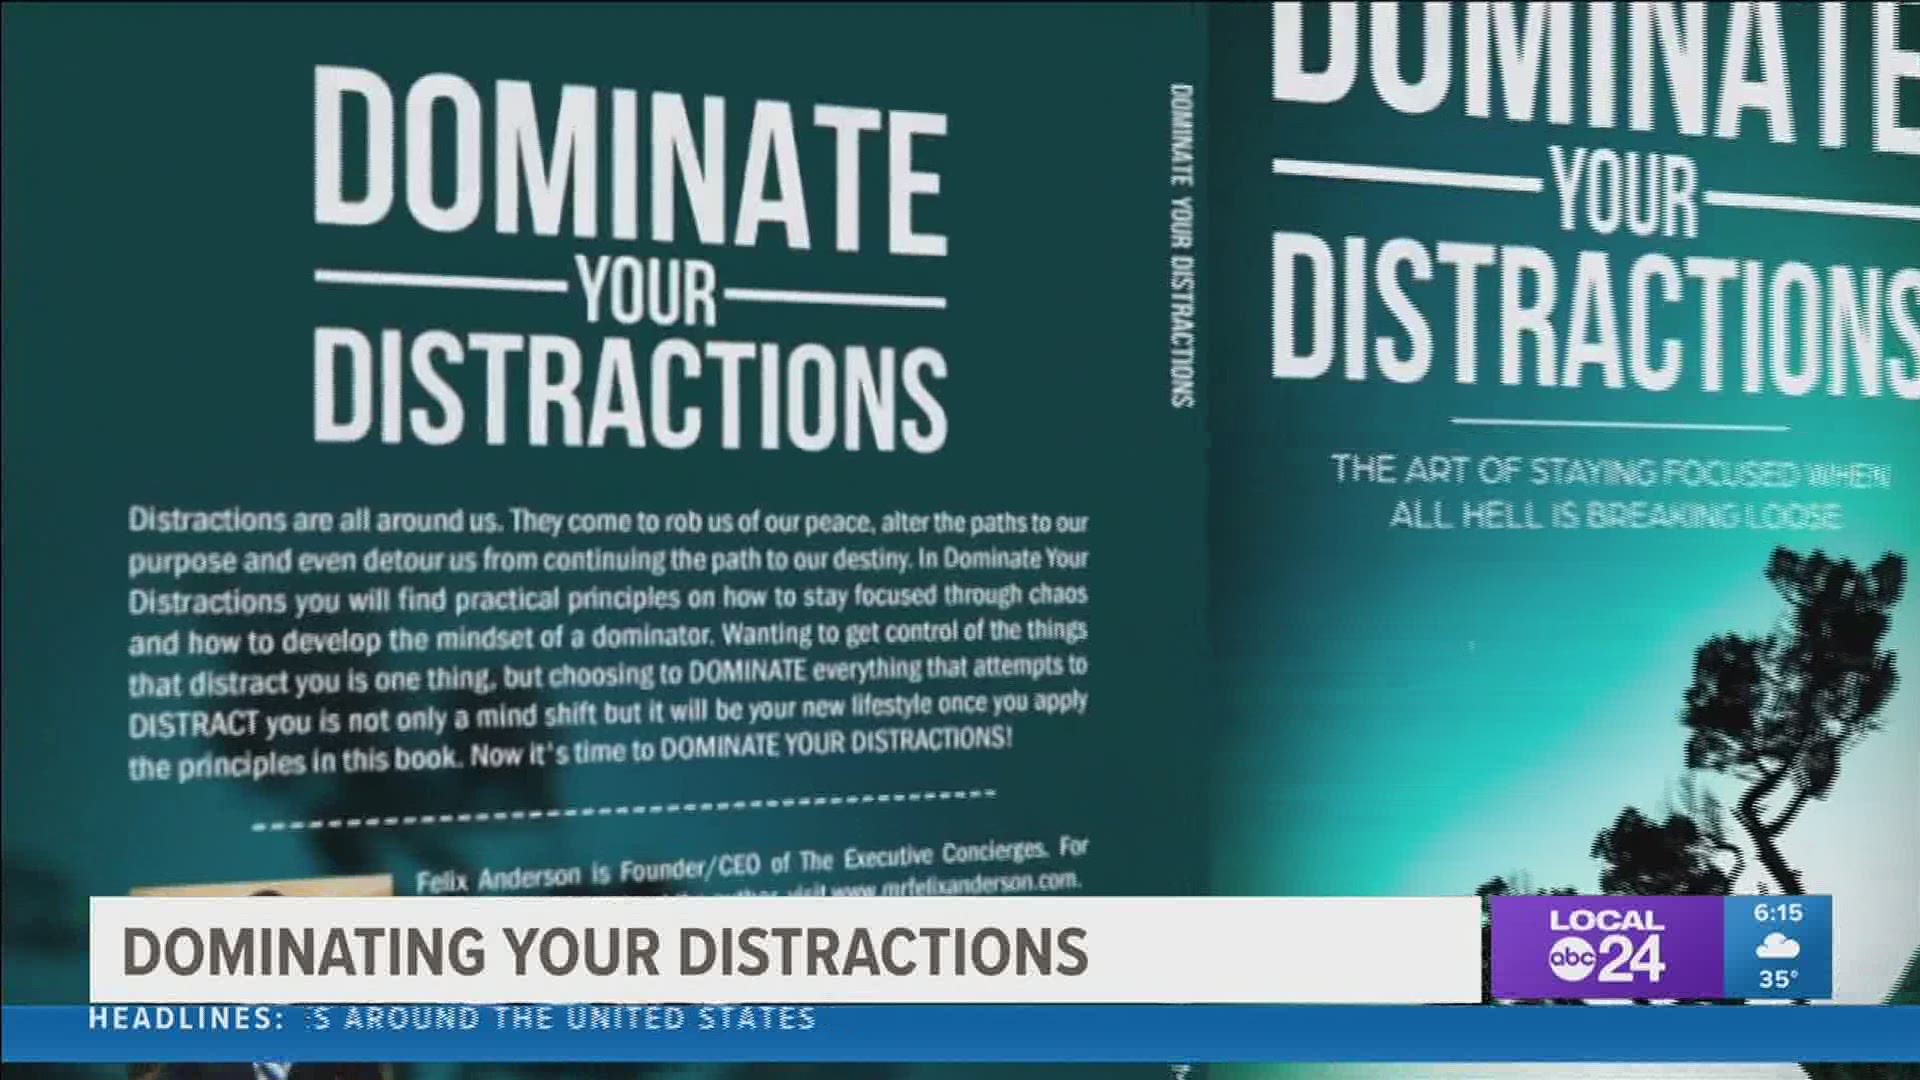 A Mid-South preacher and entrepreneur said the art of staying focused when all hell is breaking loose requires you to "Dominate Your Distractions."